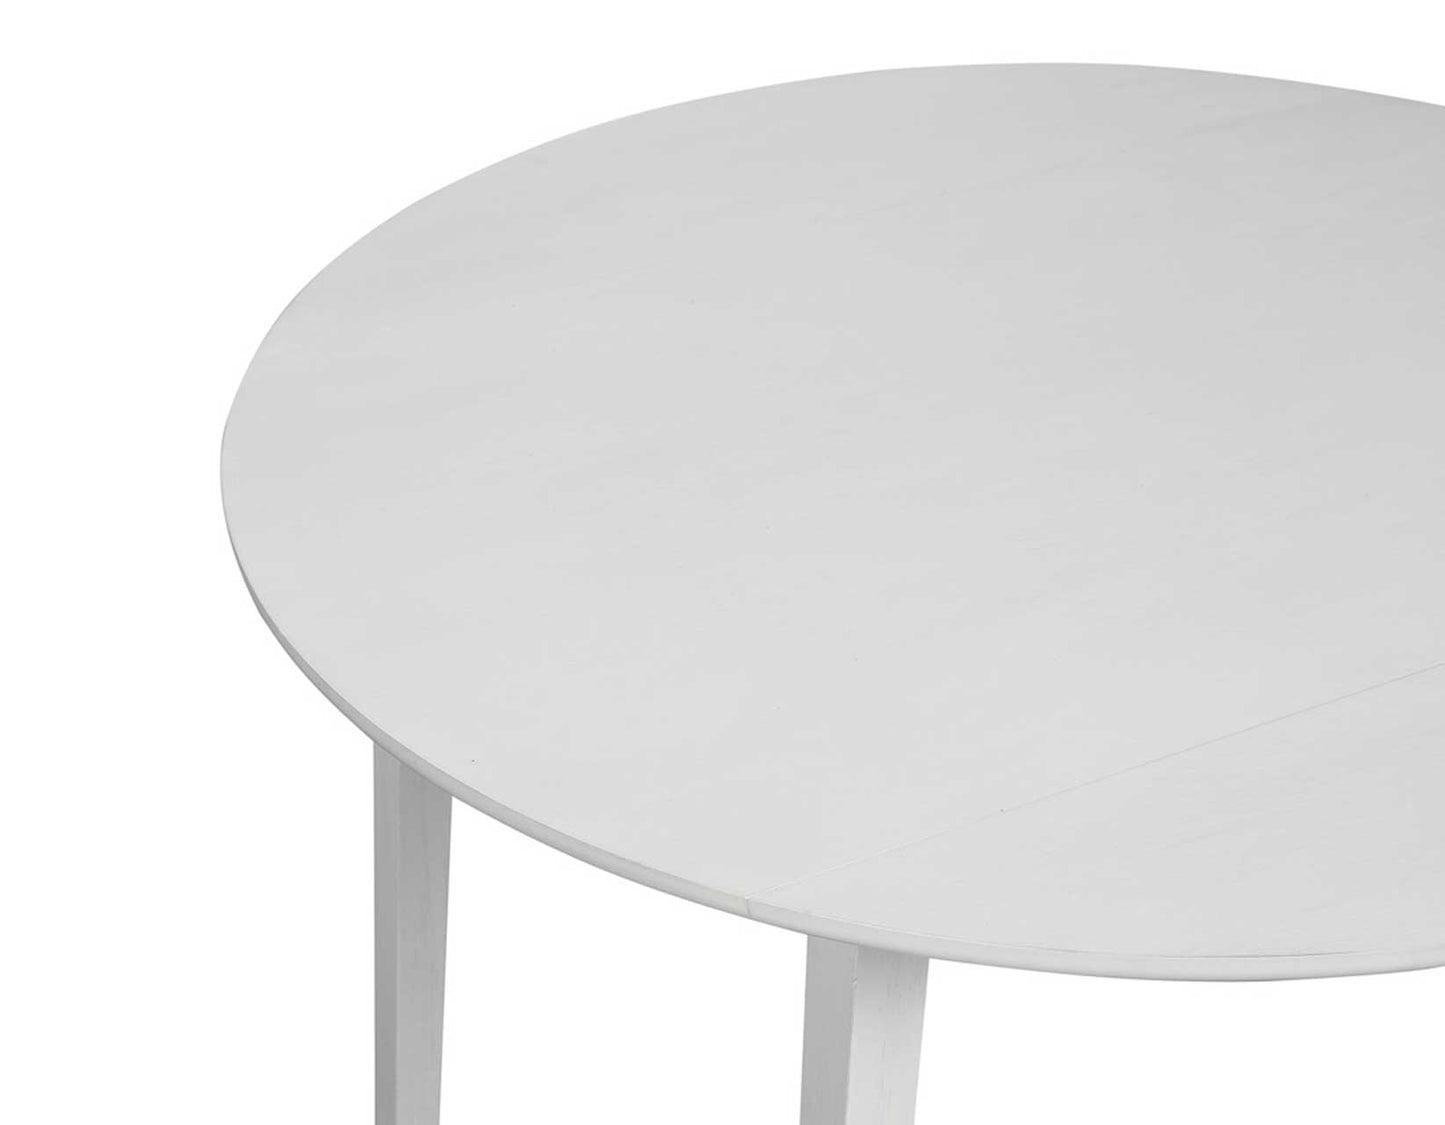 Naples 42-inch Drop-Leaf Dining Table